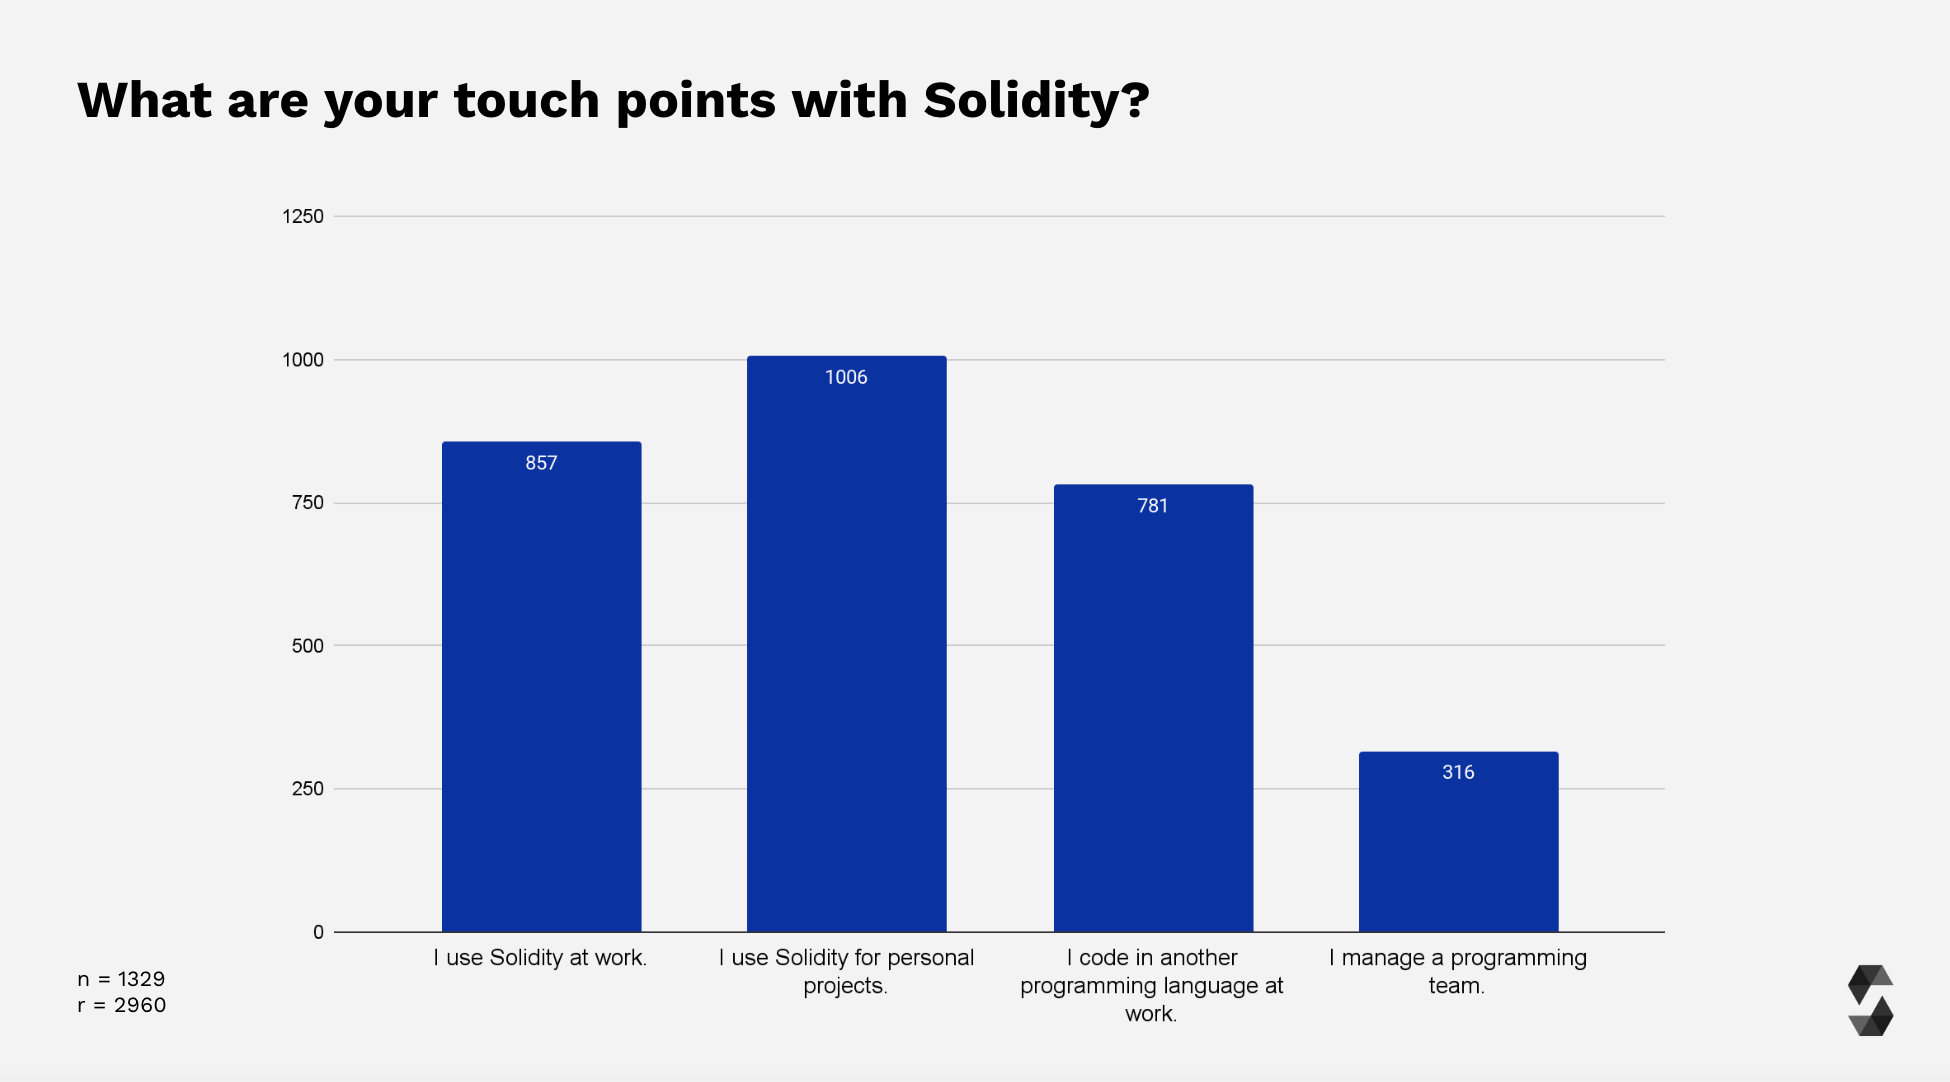 Survey Participants Touch Points with Solidity